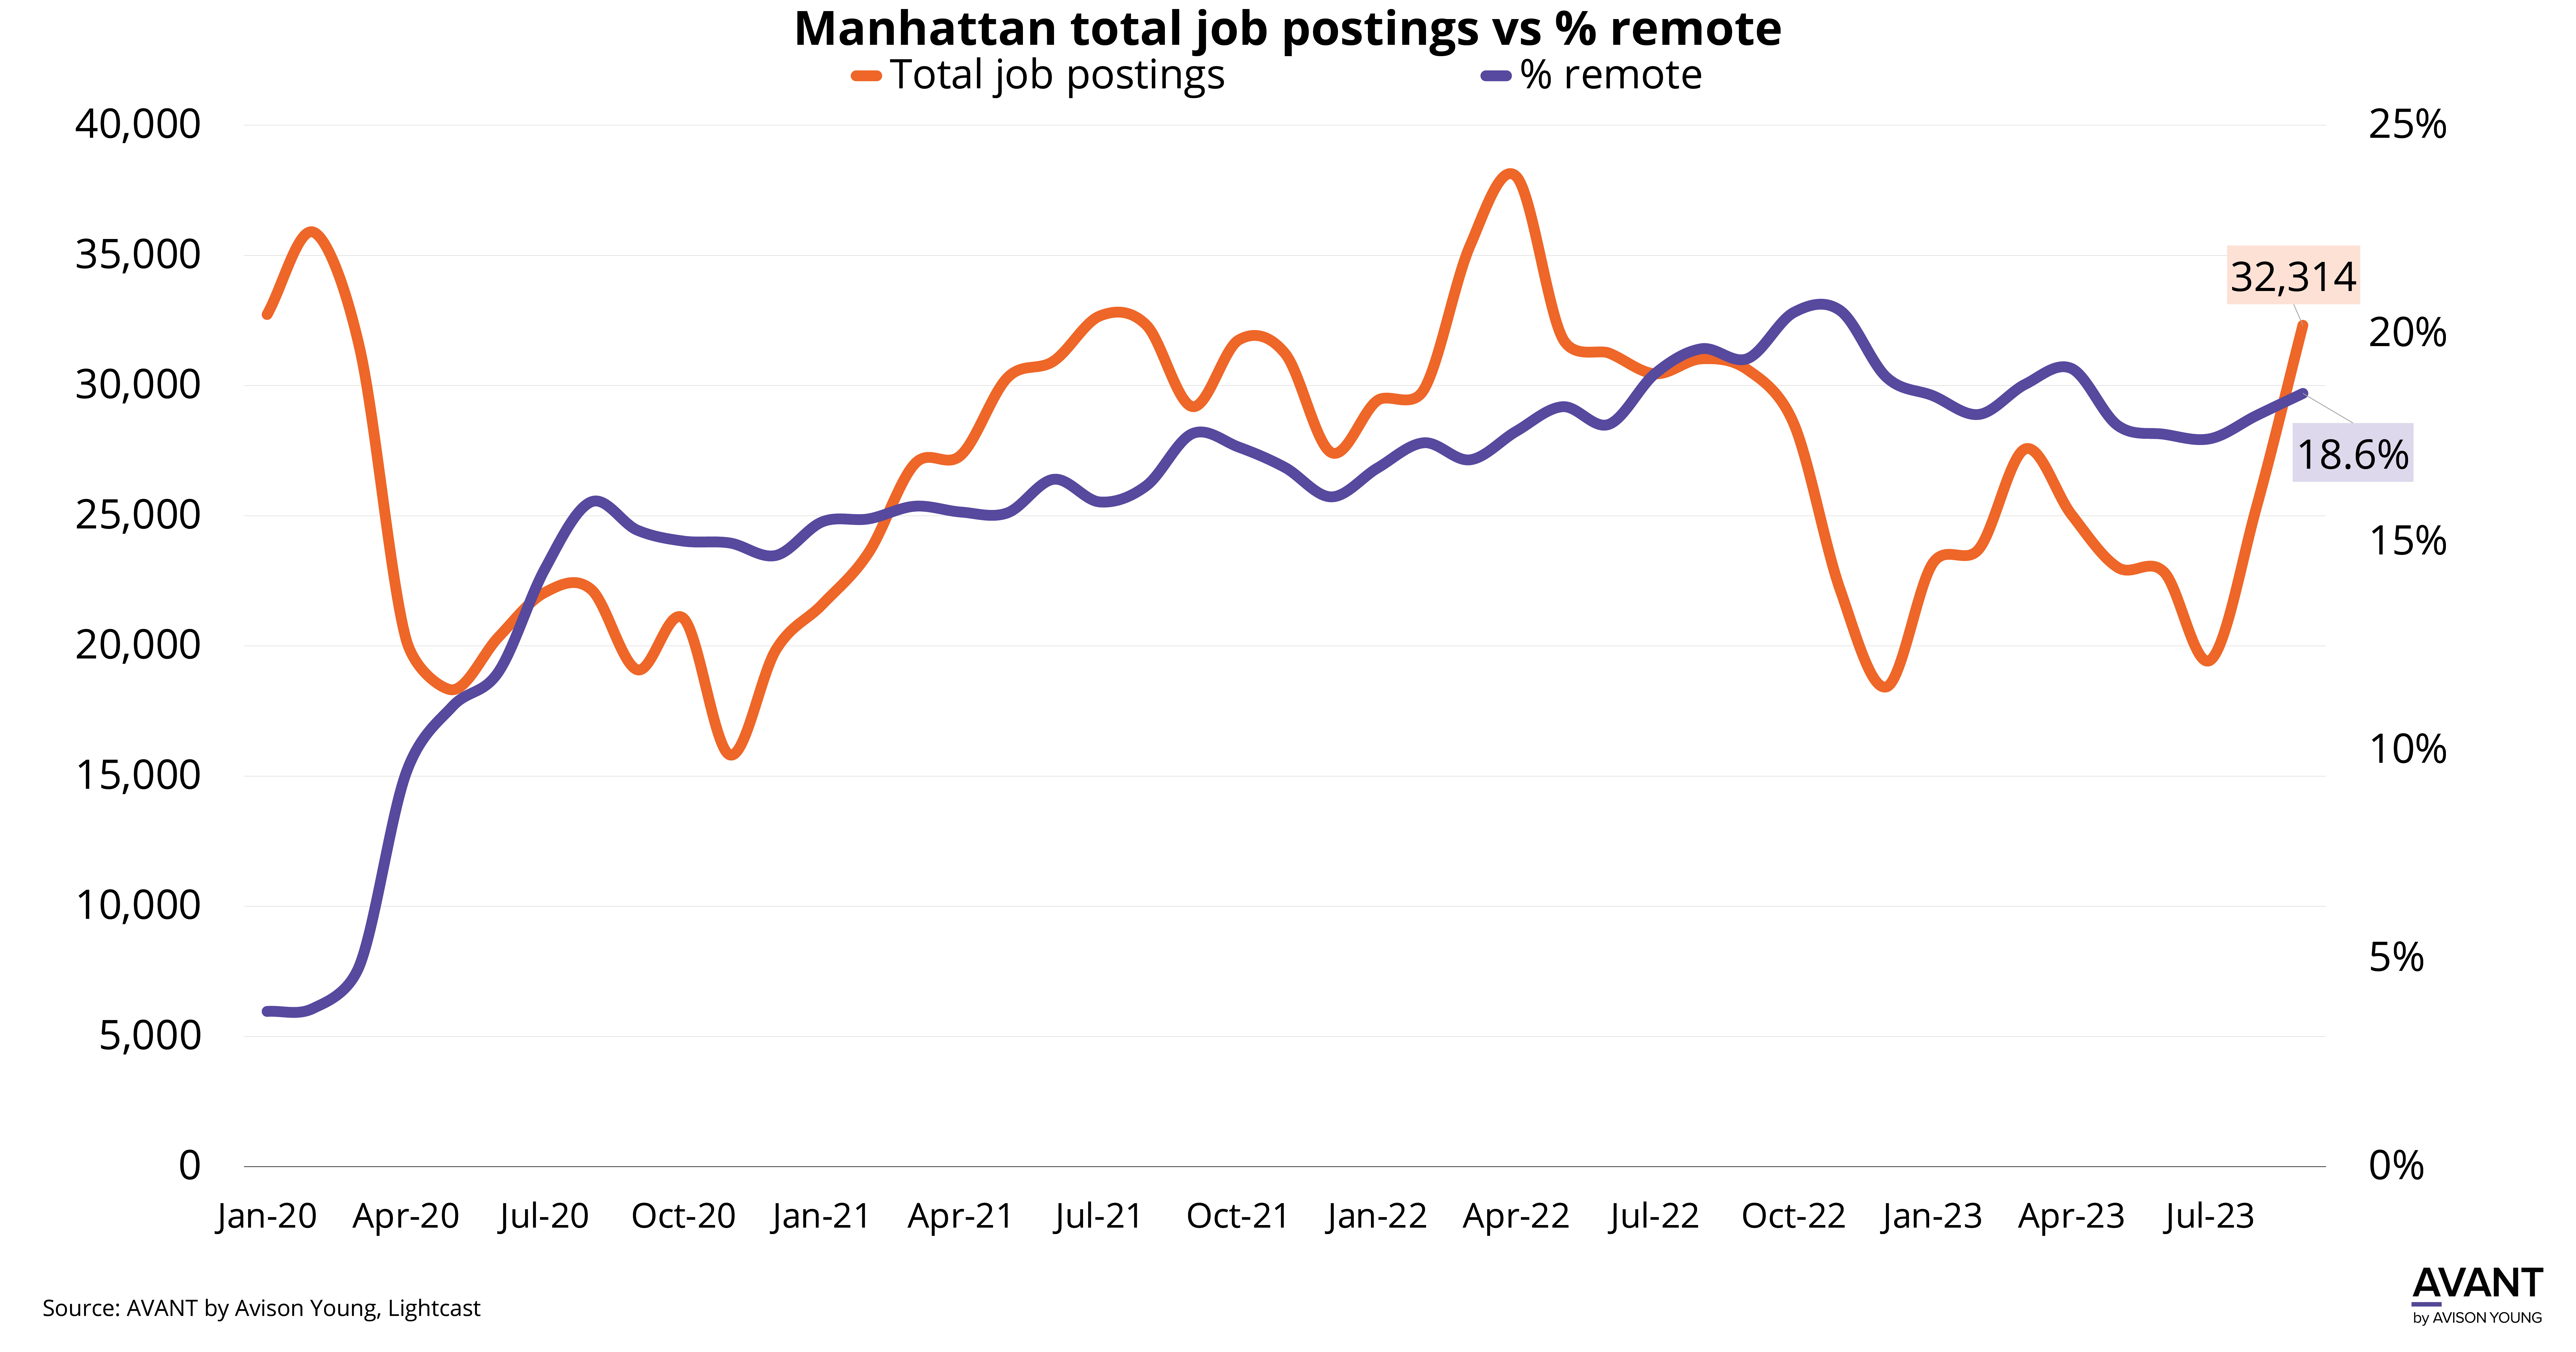 Manhattan job postings uptick, while share of remote jobs holds steady